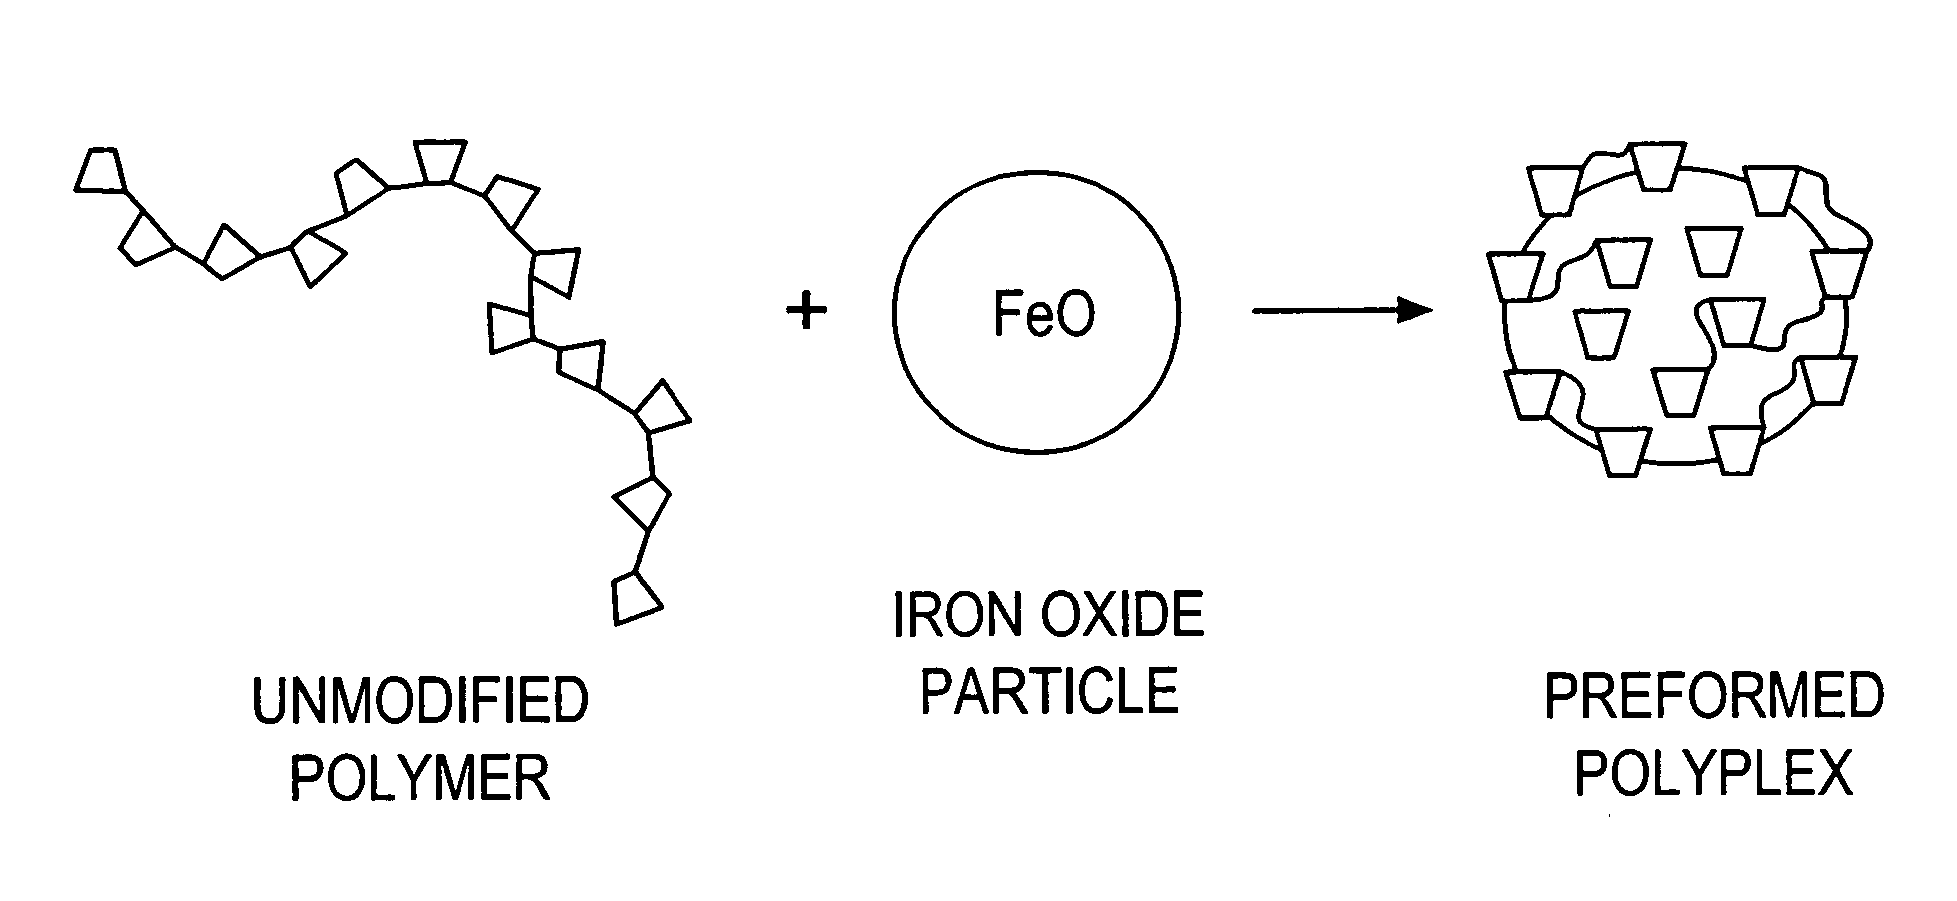 Polymer-coated paramagnetic particles